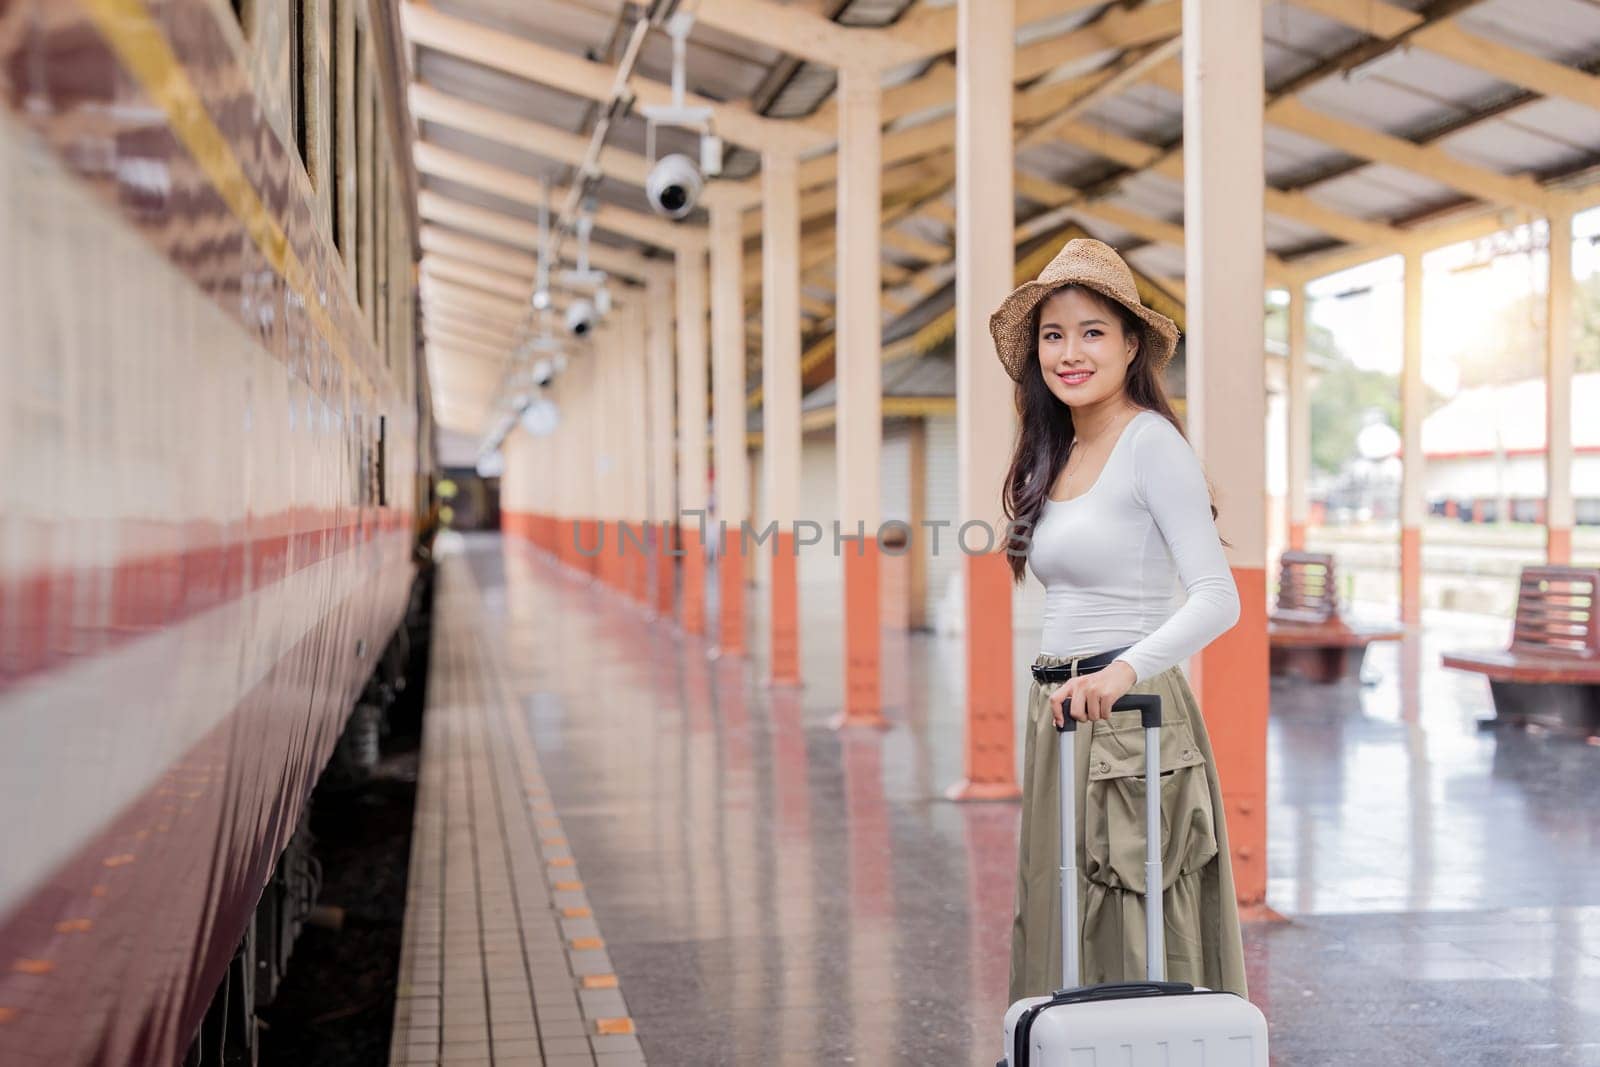 Asian women waiting for train station and carrying a suitcase planning happy holiday vacation.